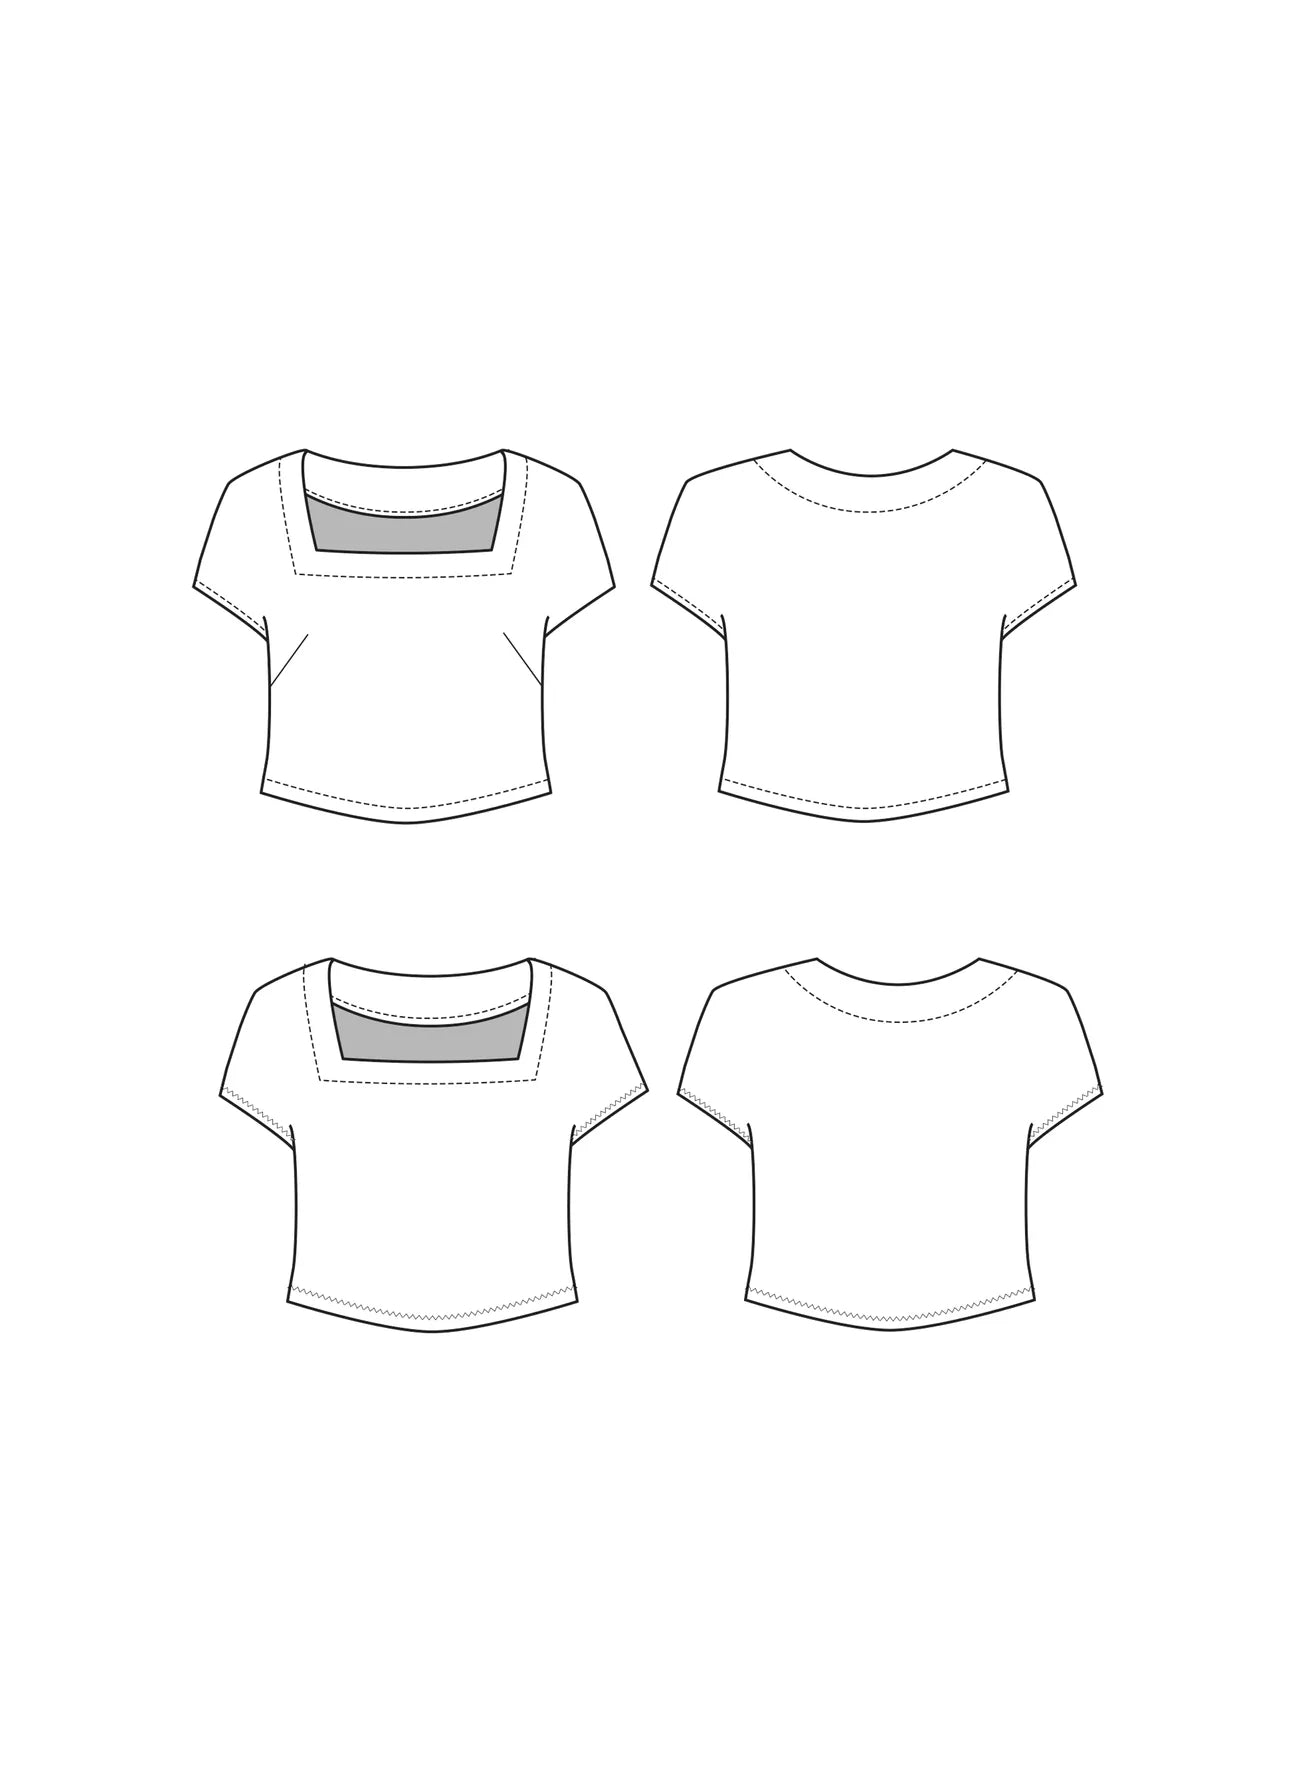 FRIDAY Pattern Co - Square Neck Top Sewing Pattern